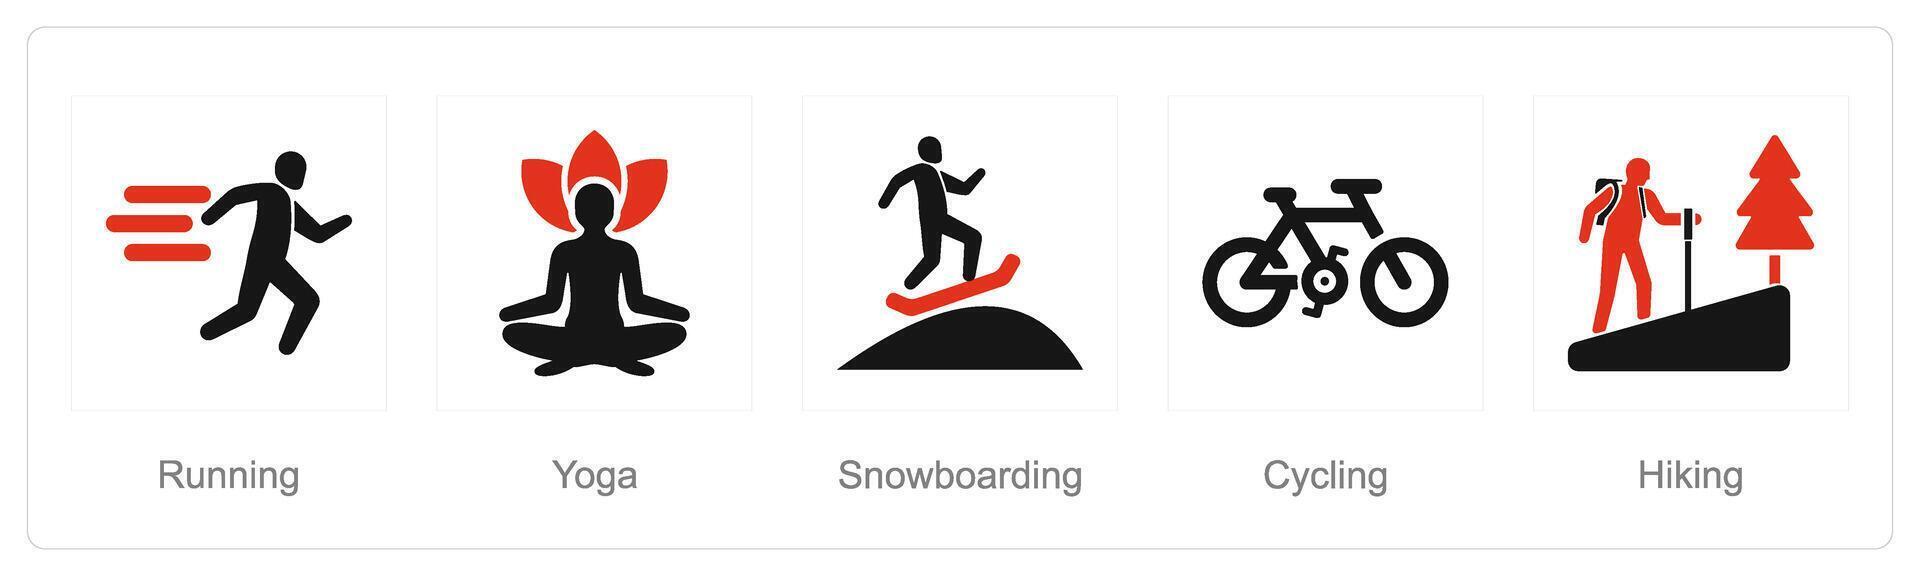 A set of 5 Hobby icons as running, yoga, snowboarding vector